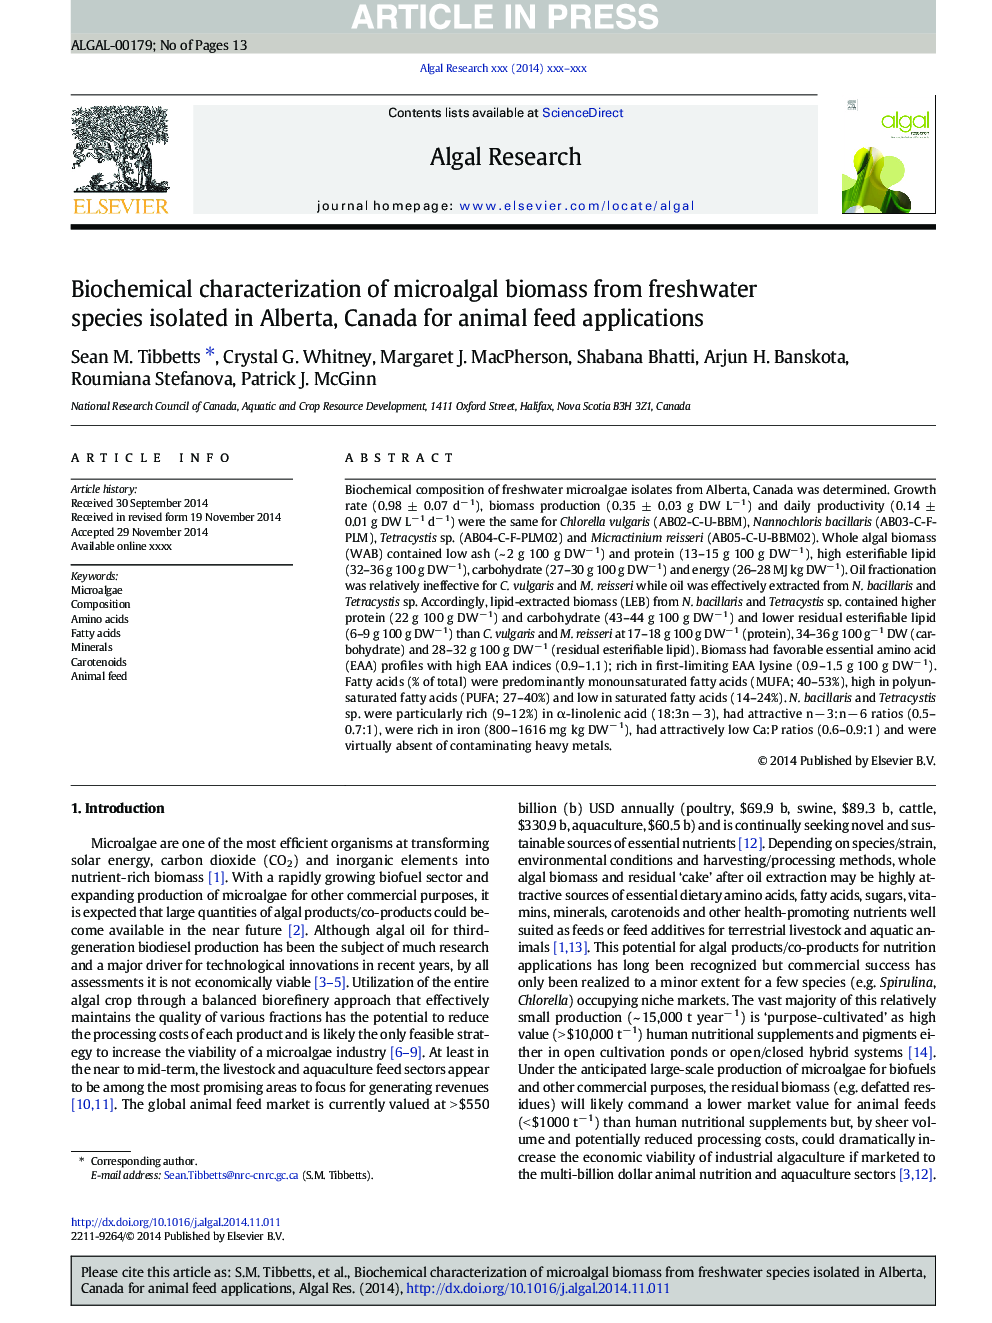 Biochemical characterization of microalgal biomass from freshwater species isolated in Alberta, Canada for animal feed applications